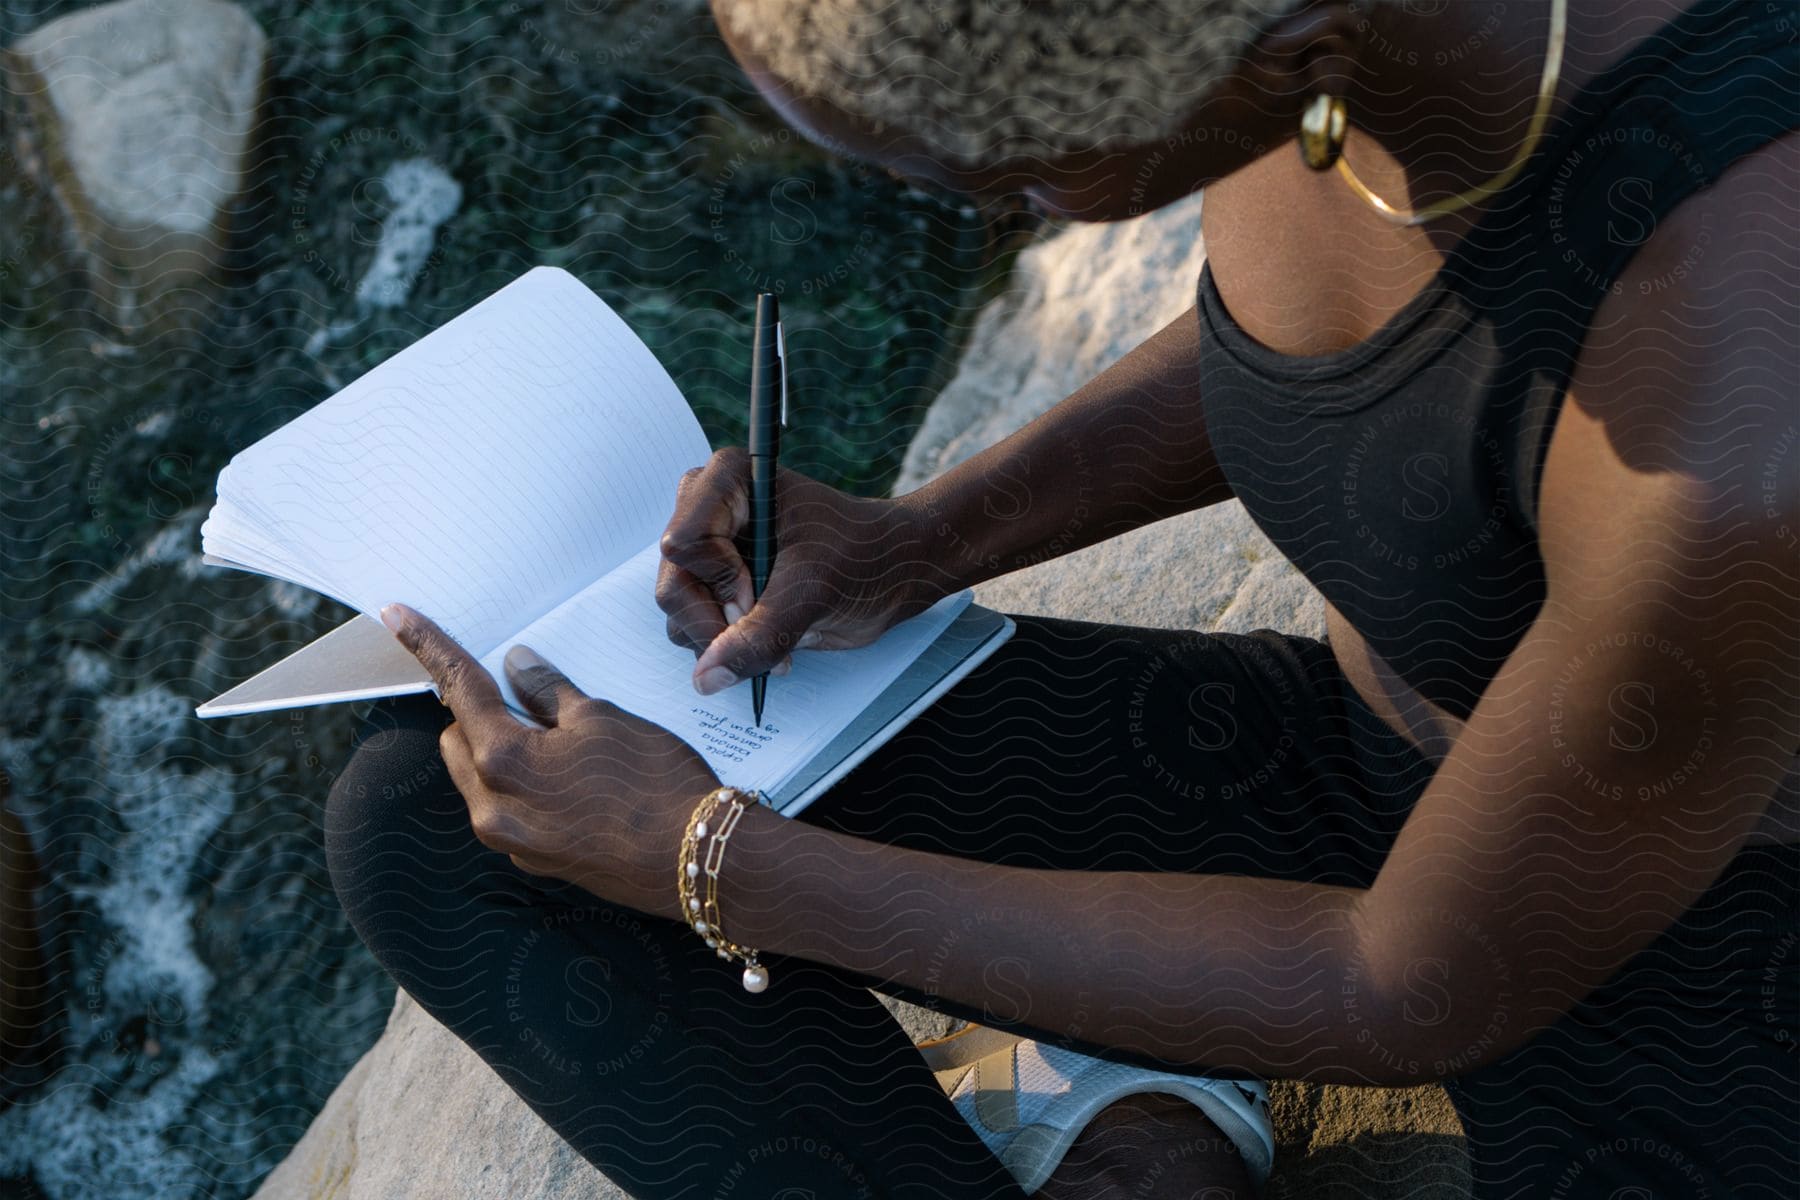 A woman writes a poem in a notebook.